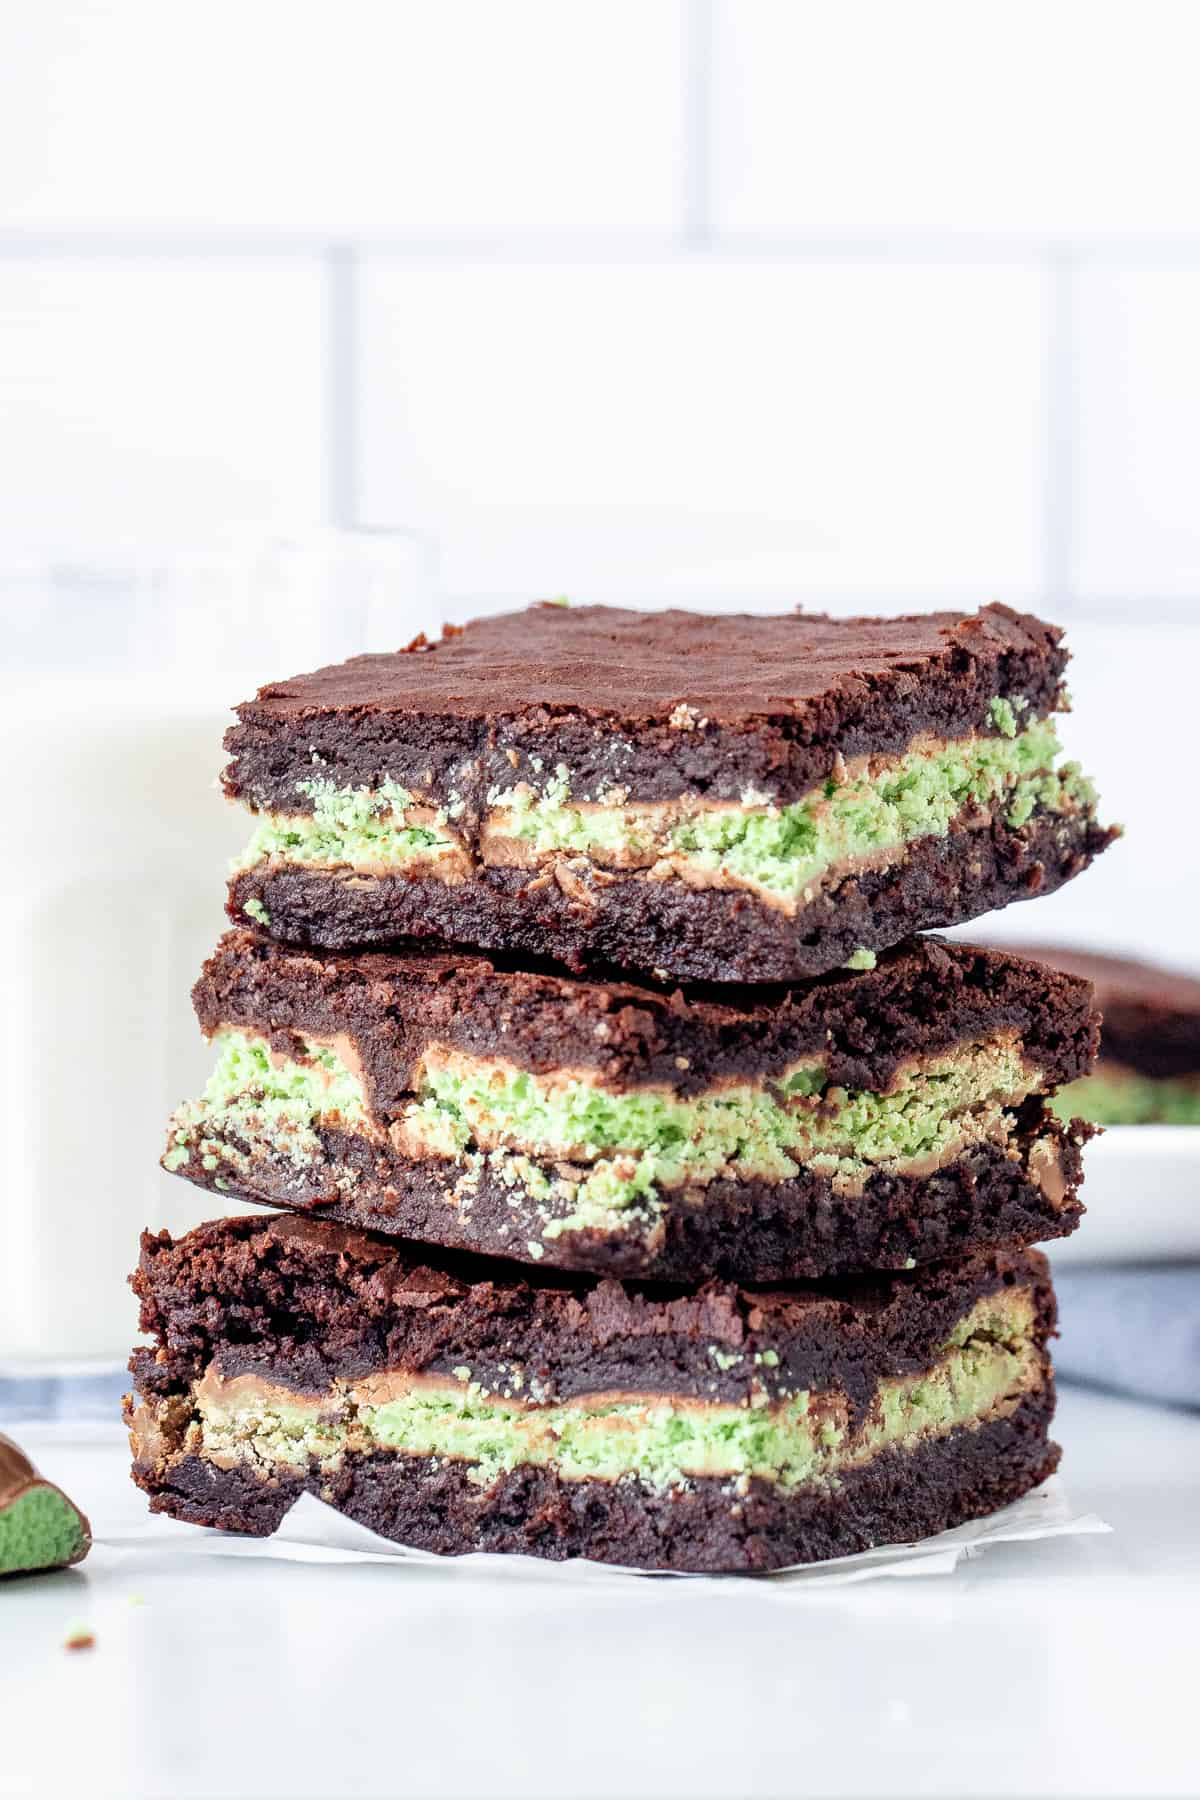 3 Mint Aero brownies with a glass of milk